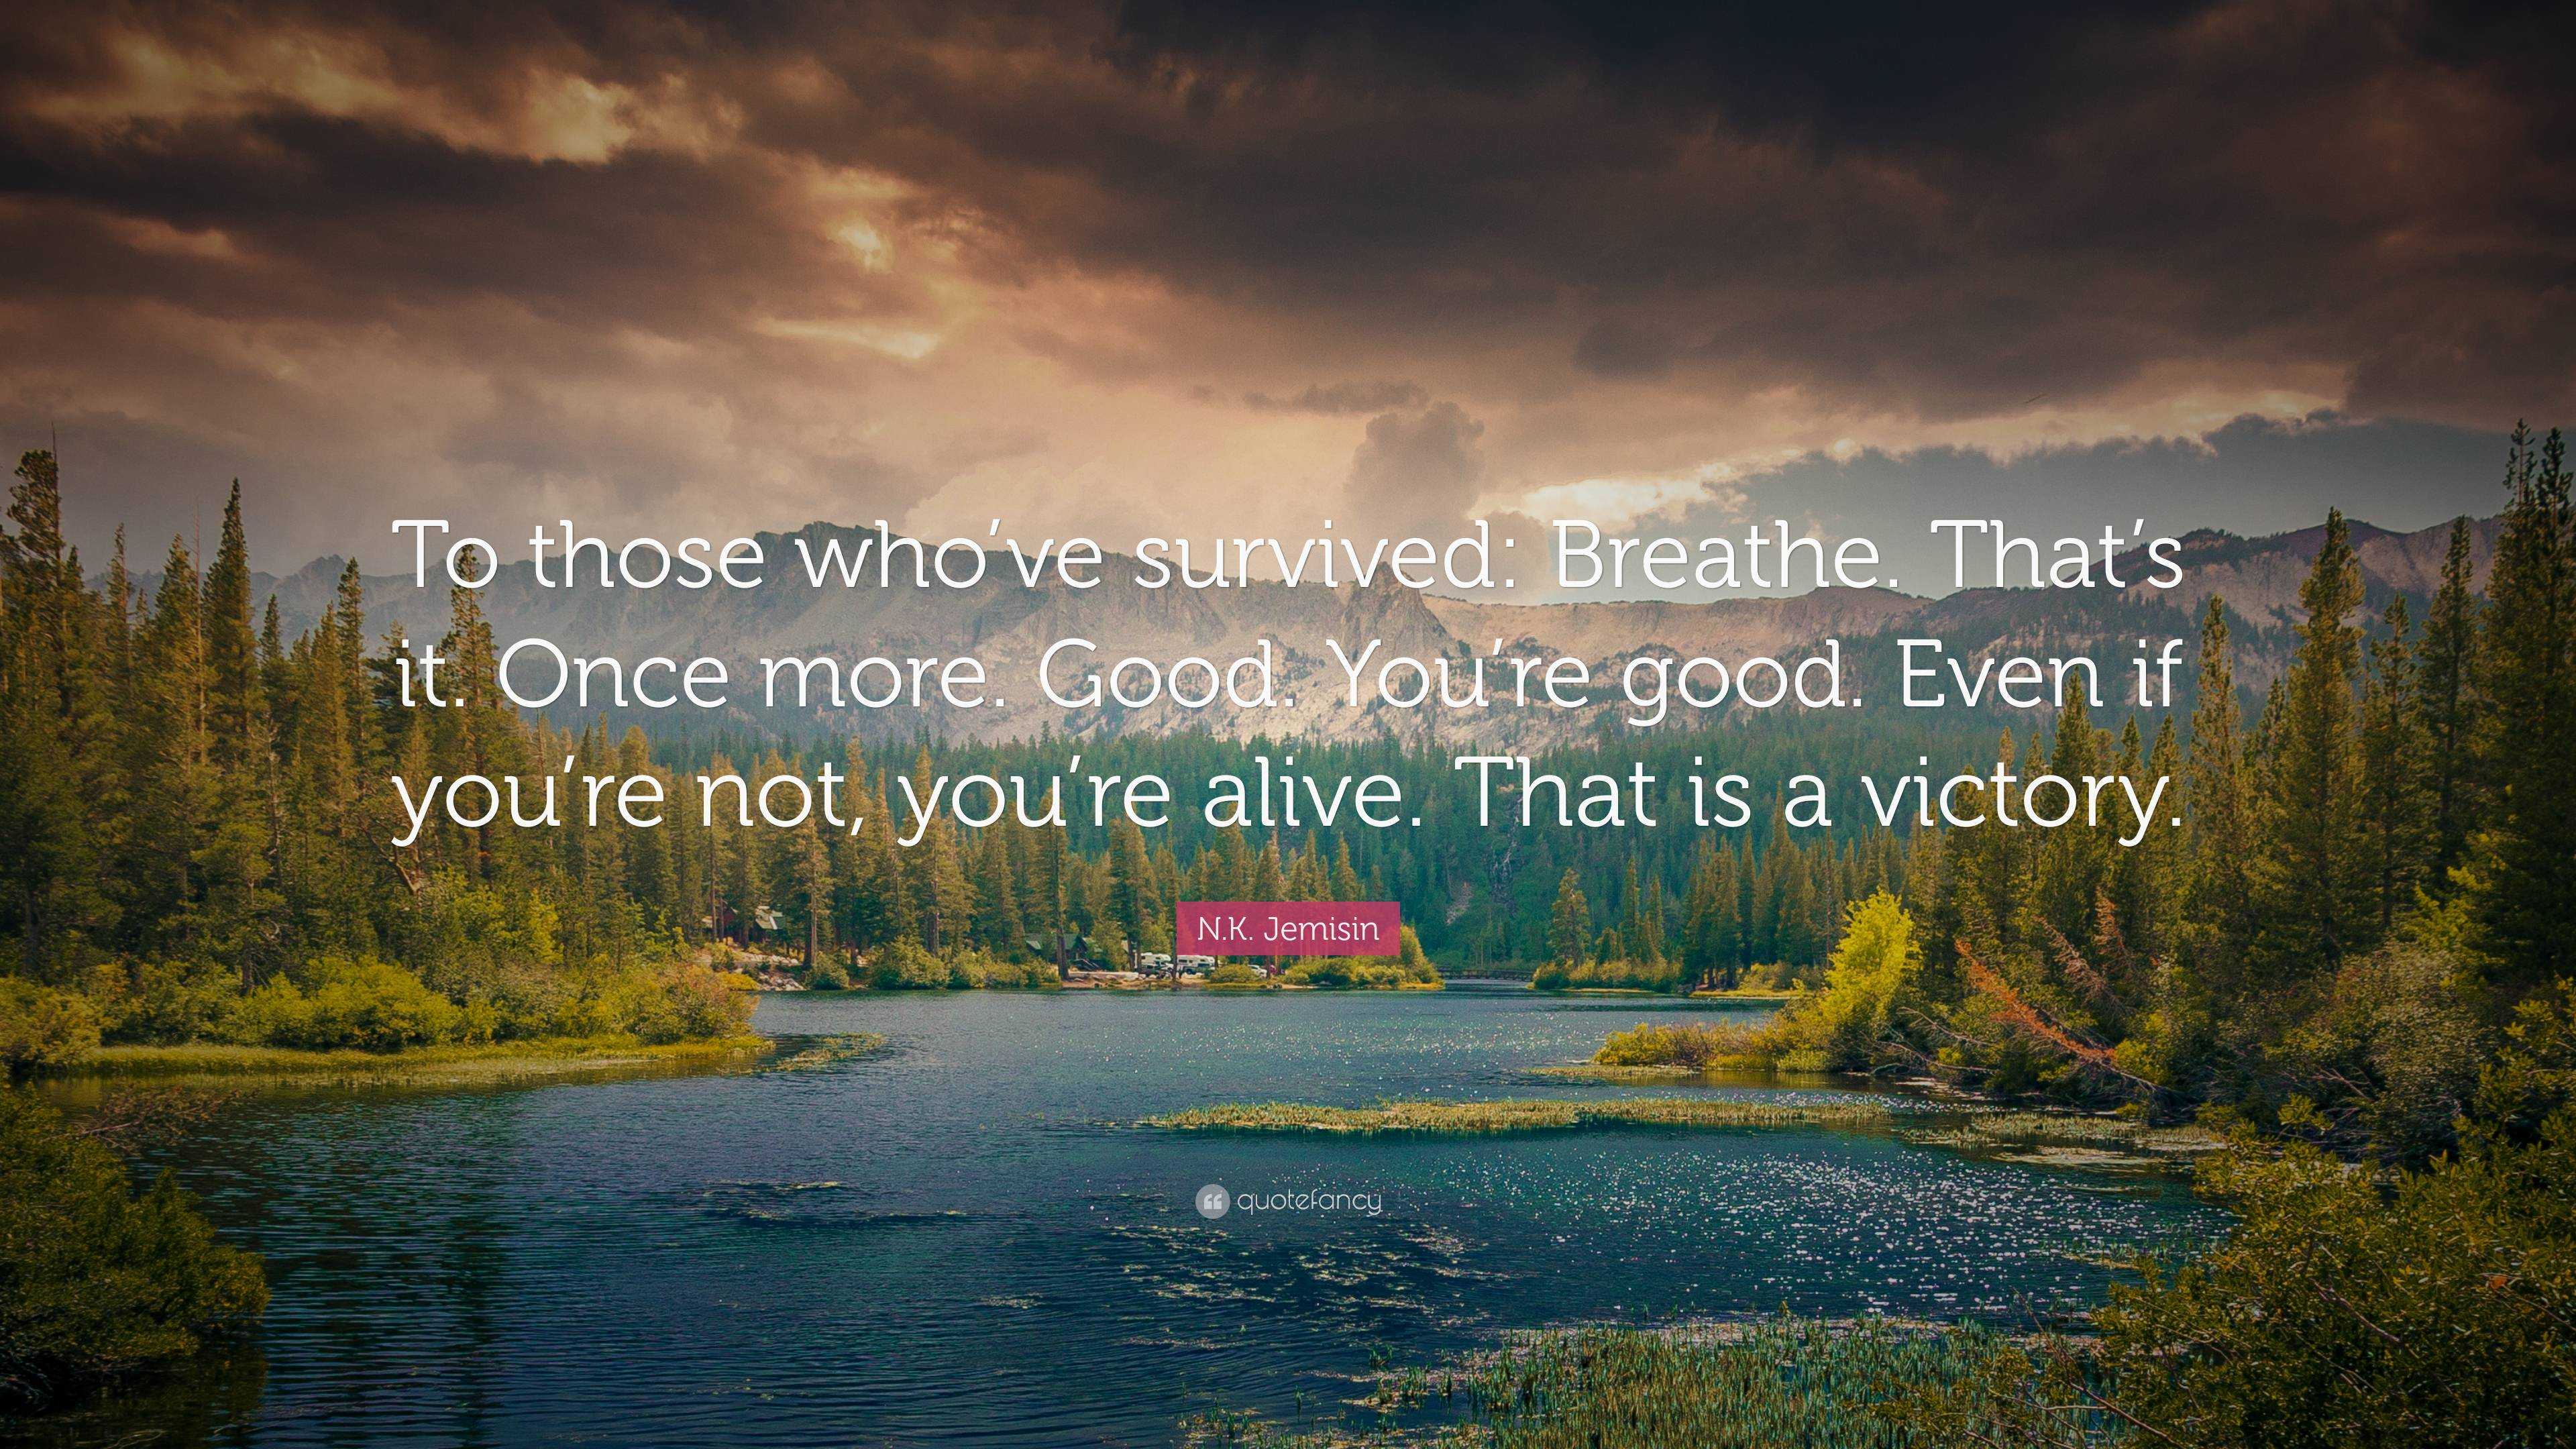 N.K. Jemisin Quote: “To those who’ve survived: Breathe. That’s it. Once ...